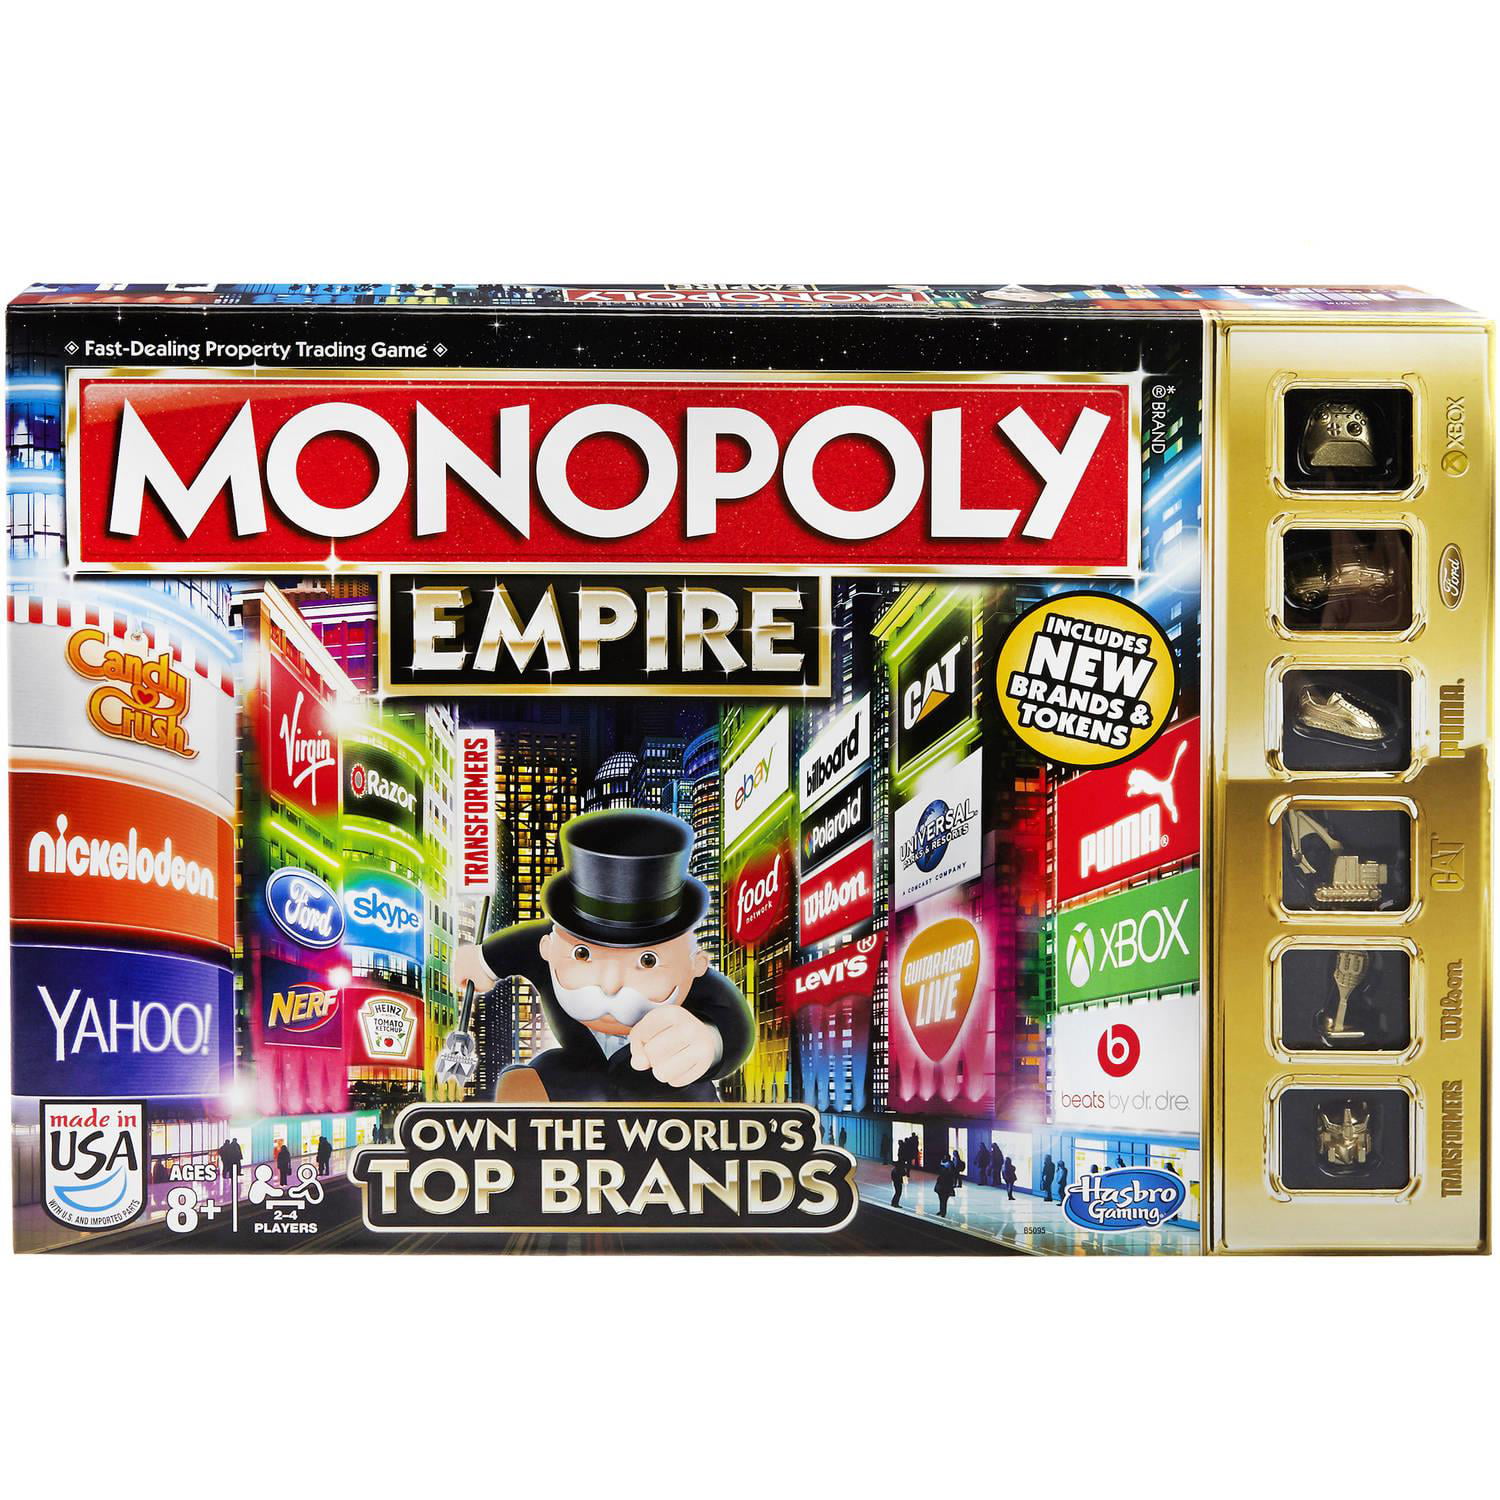 Monopoly Empire Game Discontinued by manufacturer Hasbro Games A4770